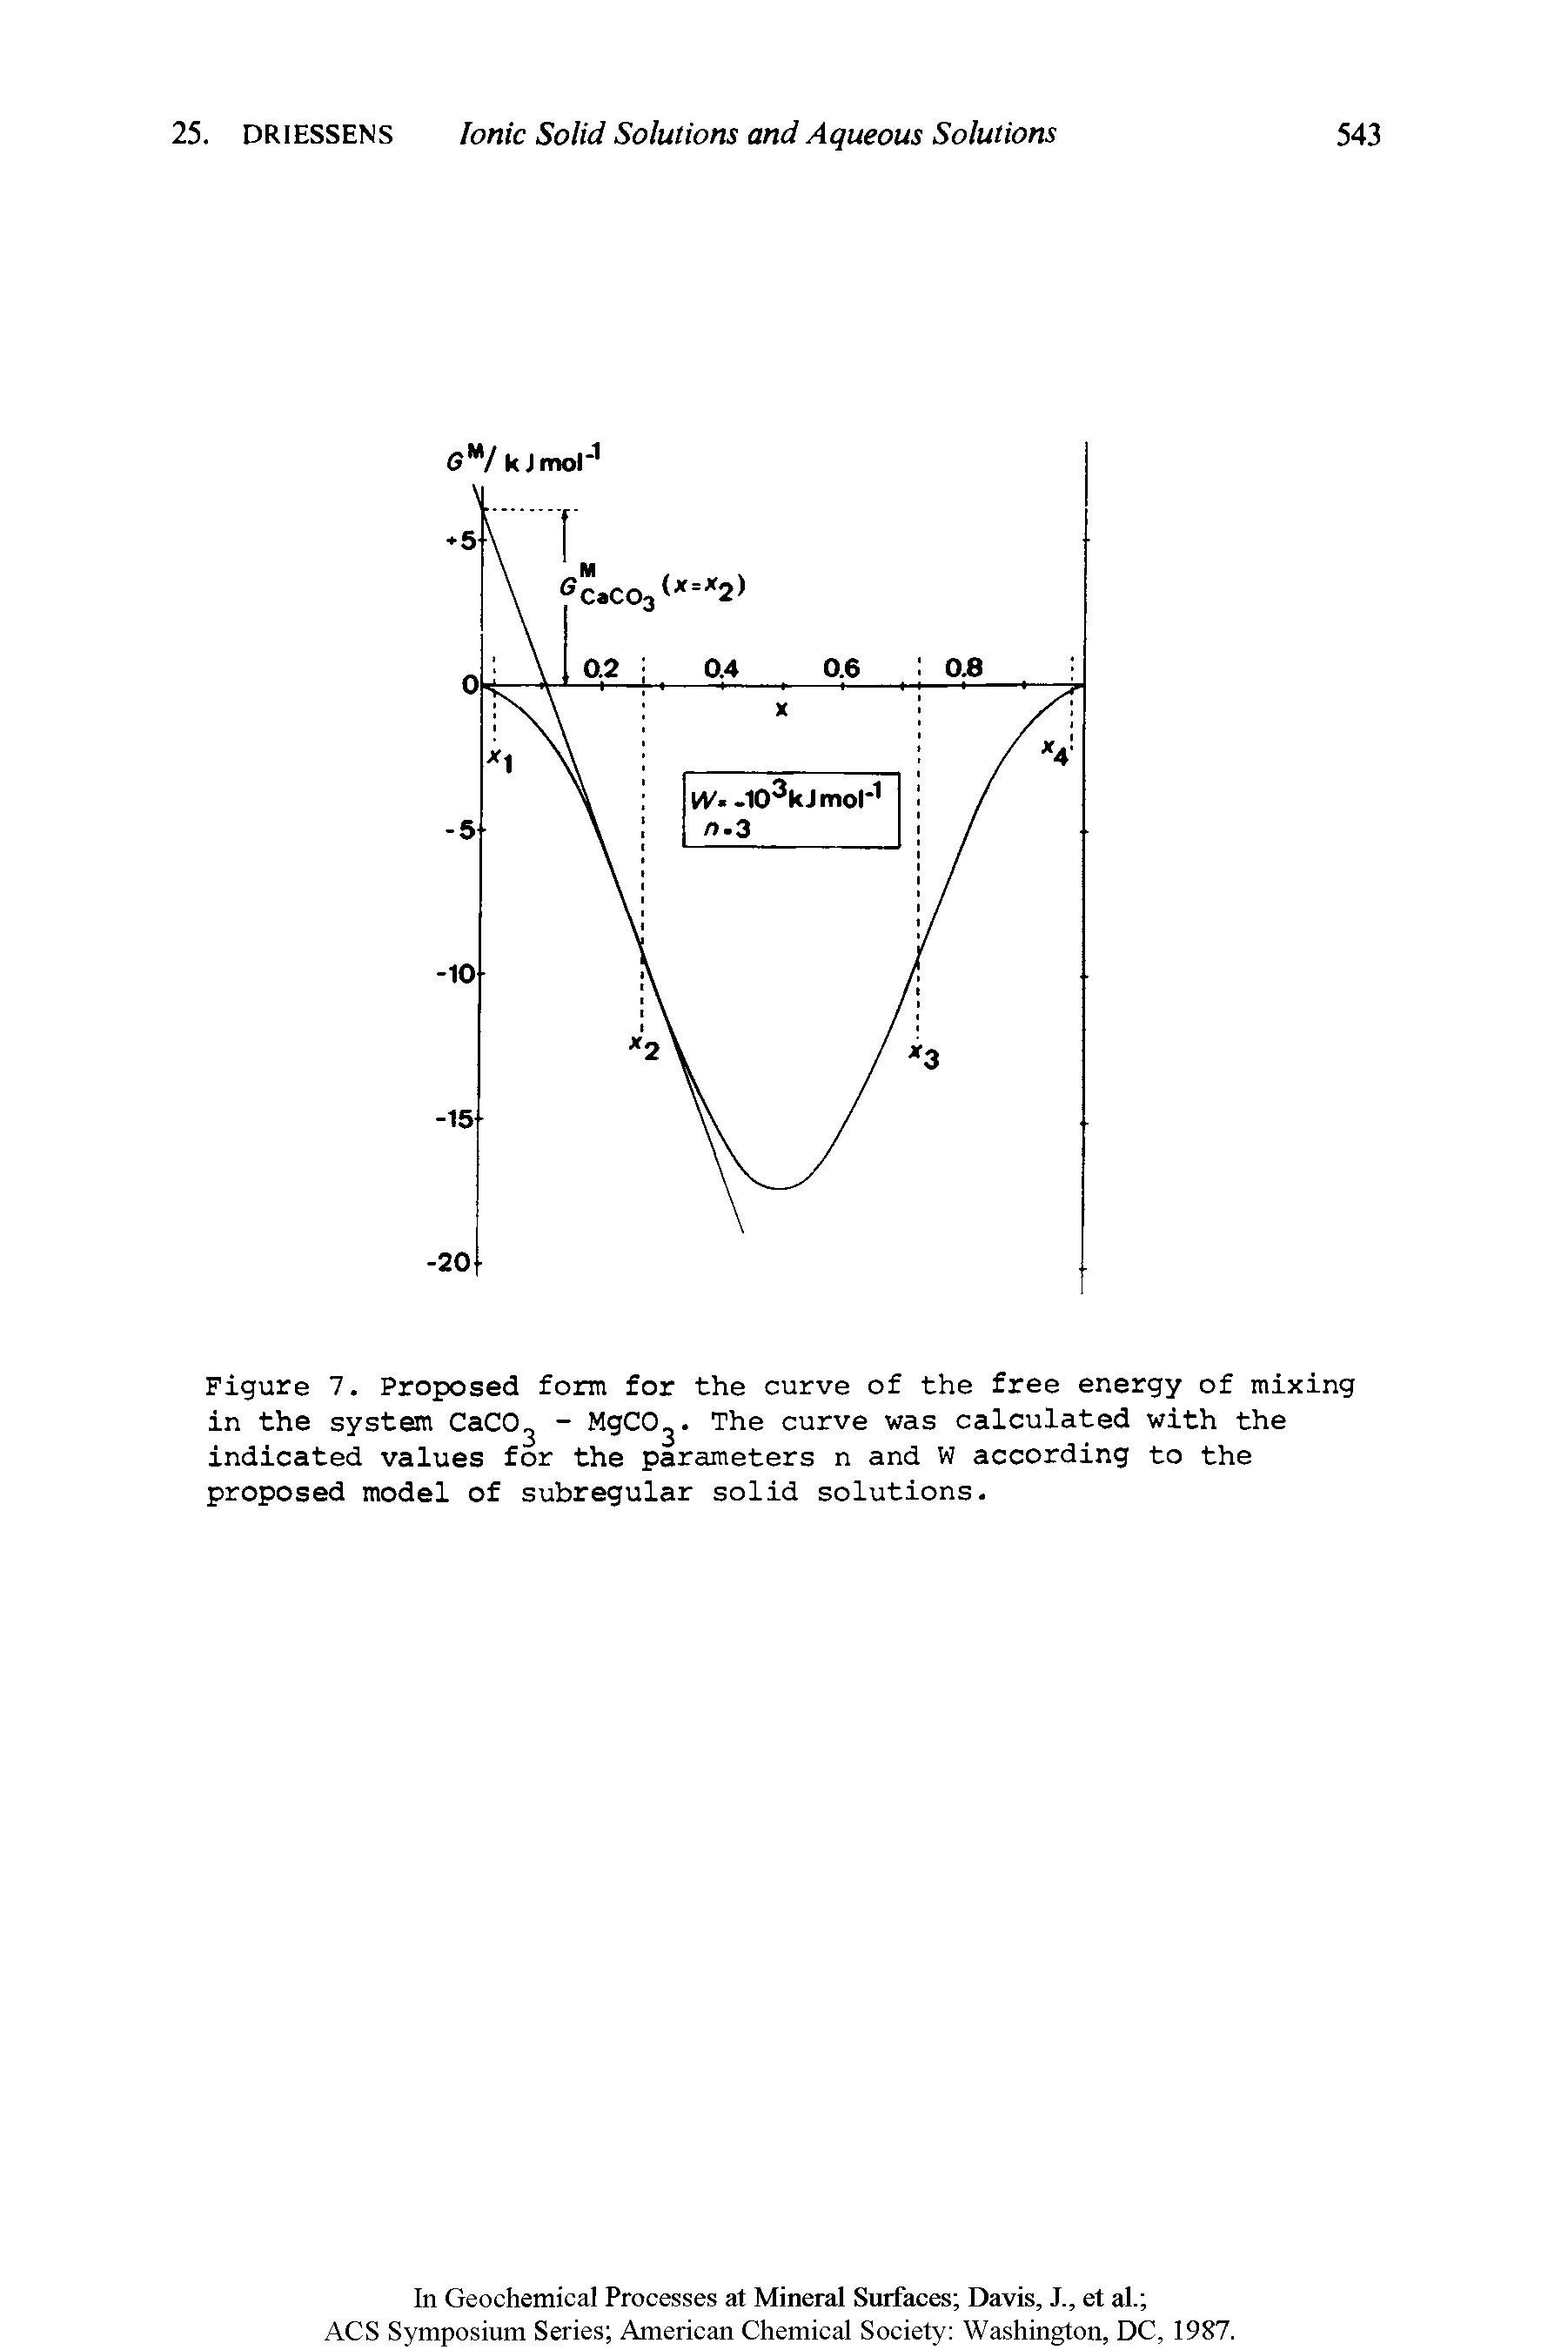 Figure 7. Proposed form for the curve of the free energy of mixing in the system CaC03 - MgC03. The curve was calculated with the indicated values for the parameters n and W according to the proposed model of subregular solid solutions.